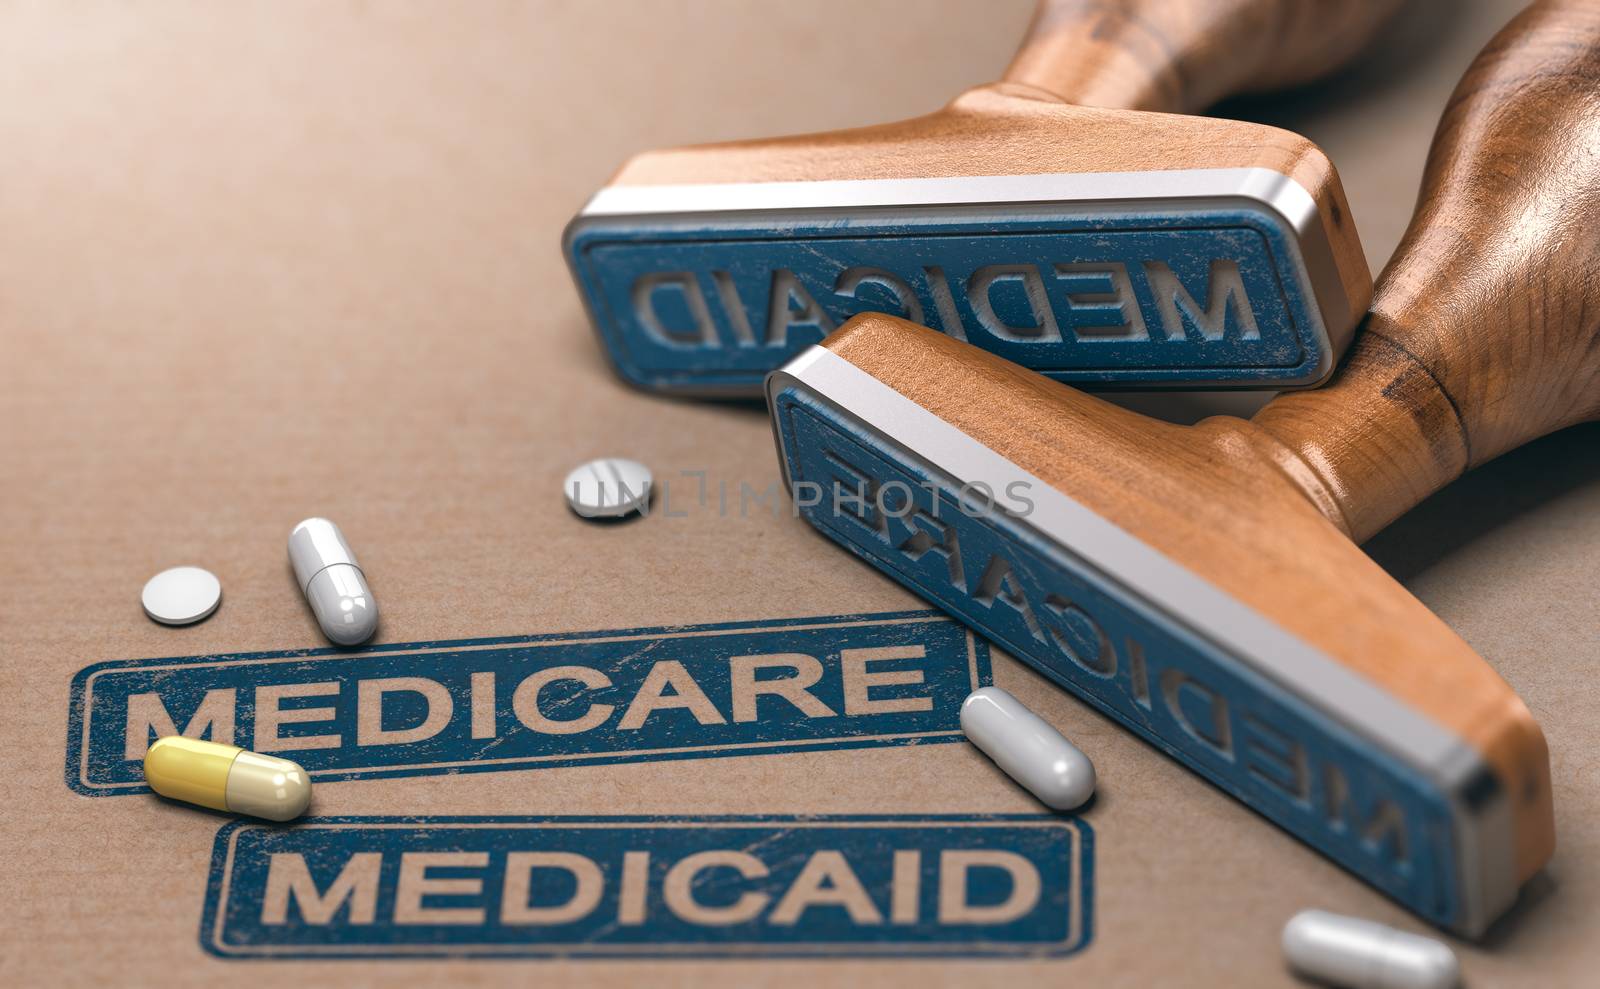 3D illustration of two rubber stamps with the words Mercicare and Medicaid over paper background.